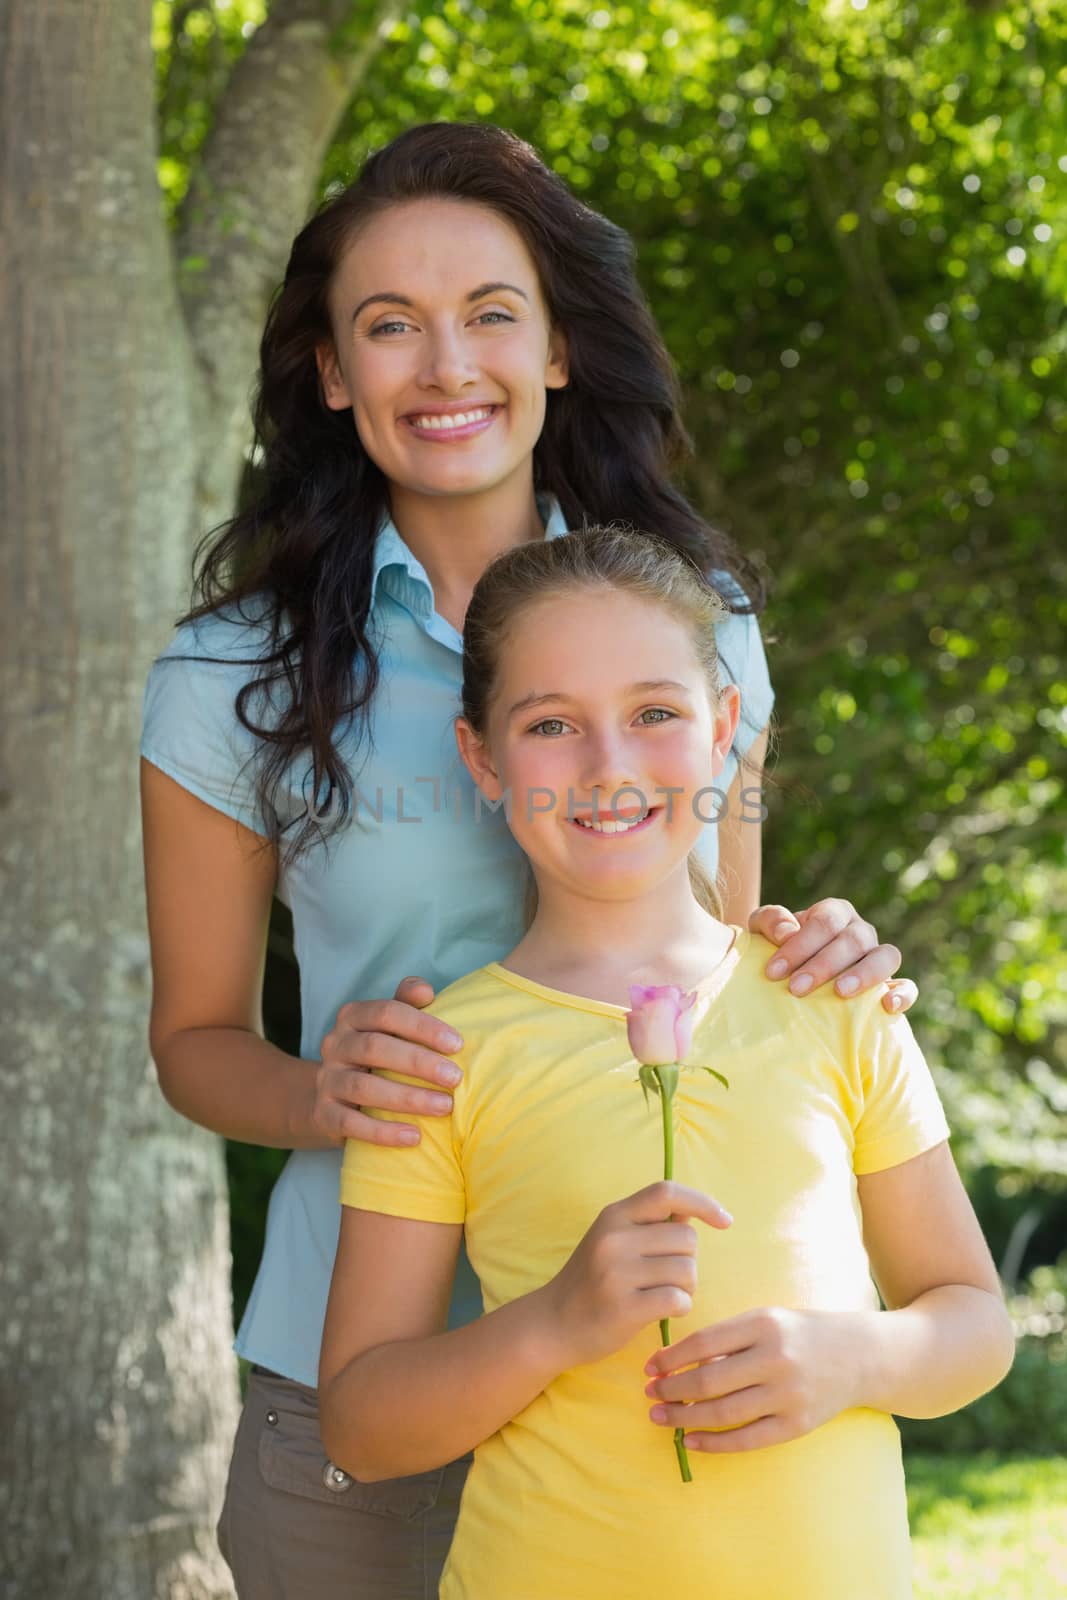 Portrait of cute girl holding rose while standing with mother in park